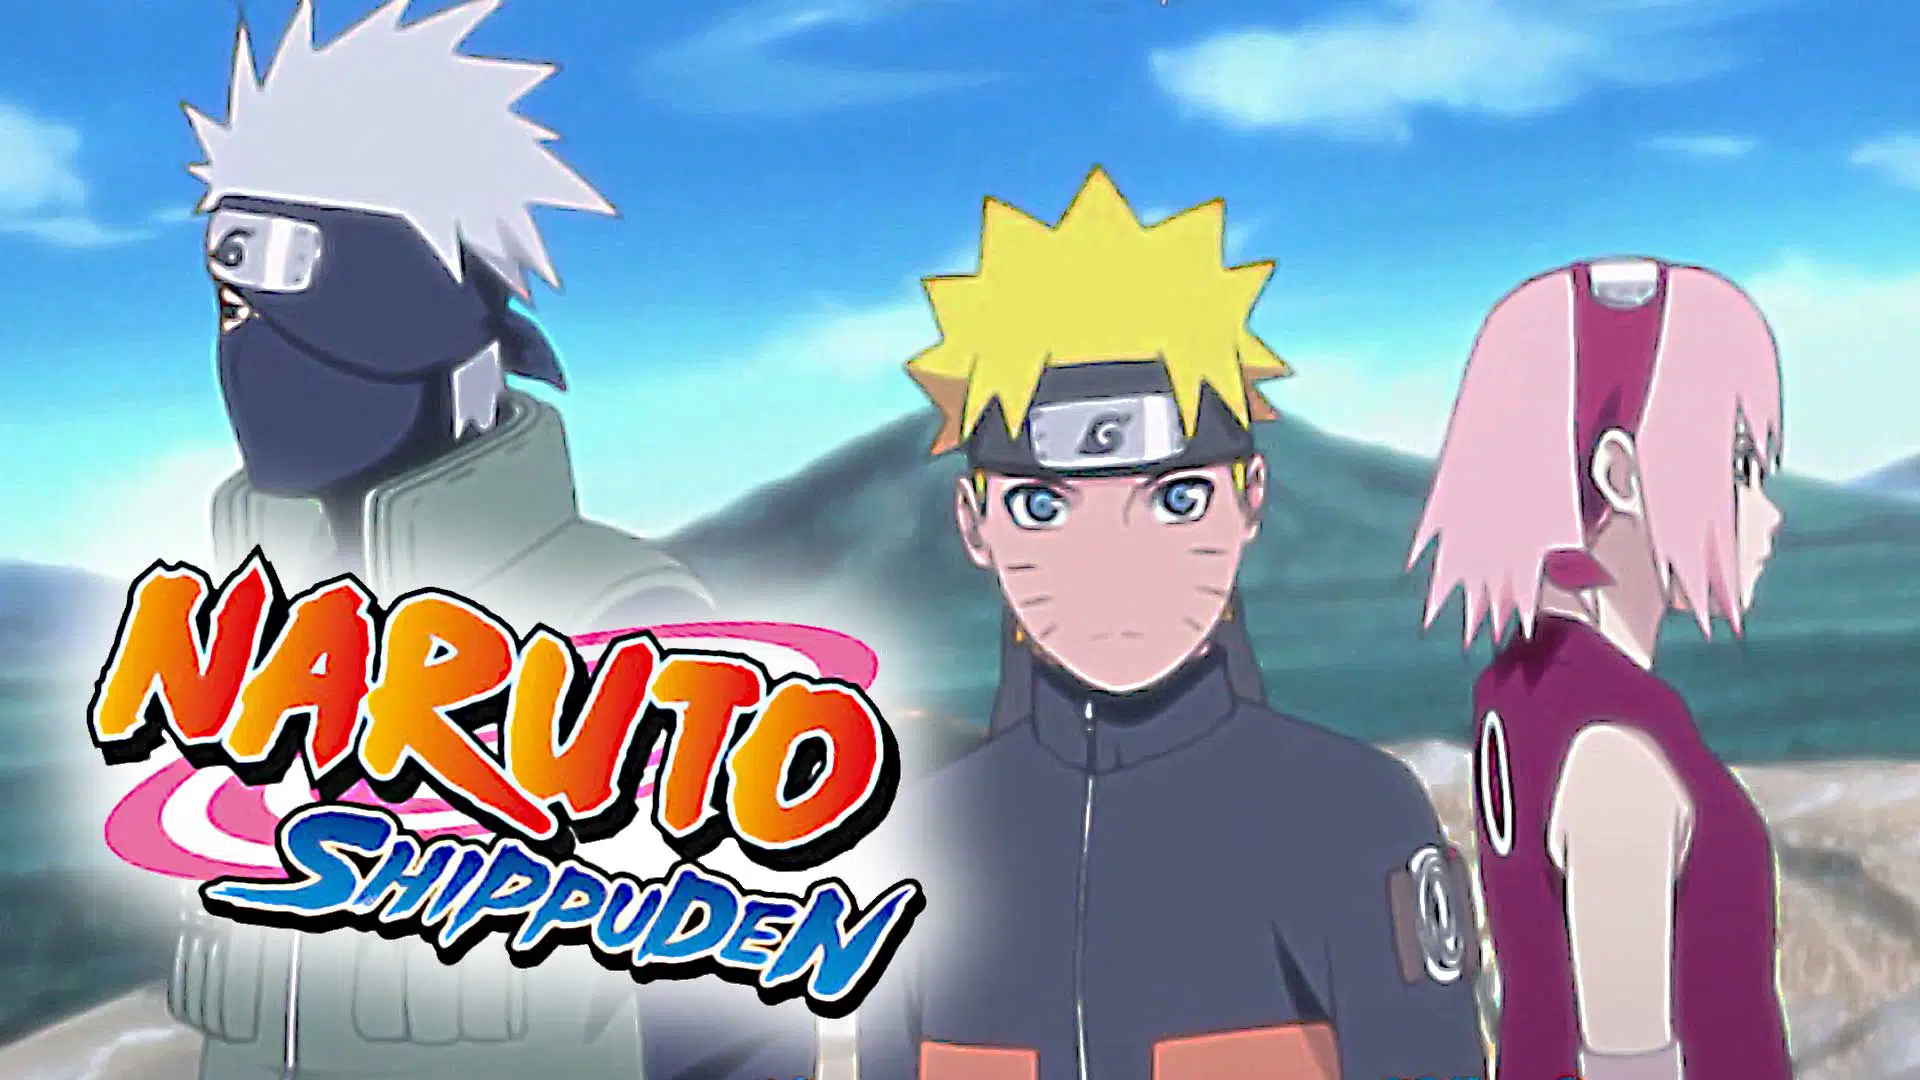 bryce parris recommends naruto shippuden anime yt pic